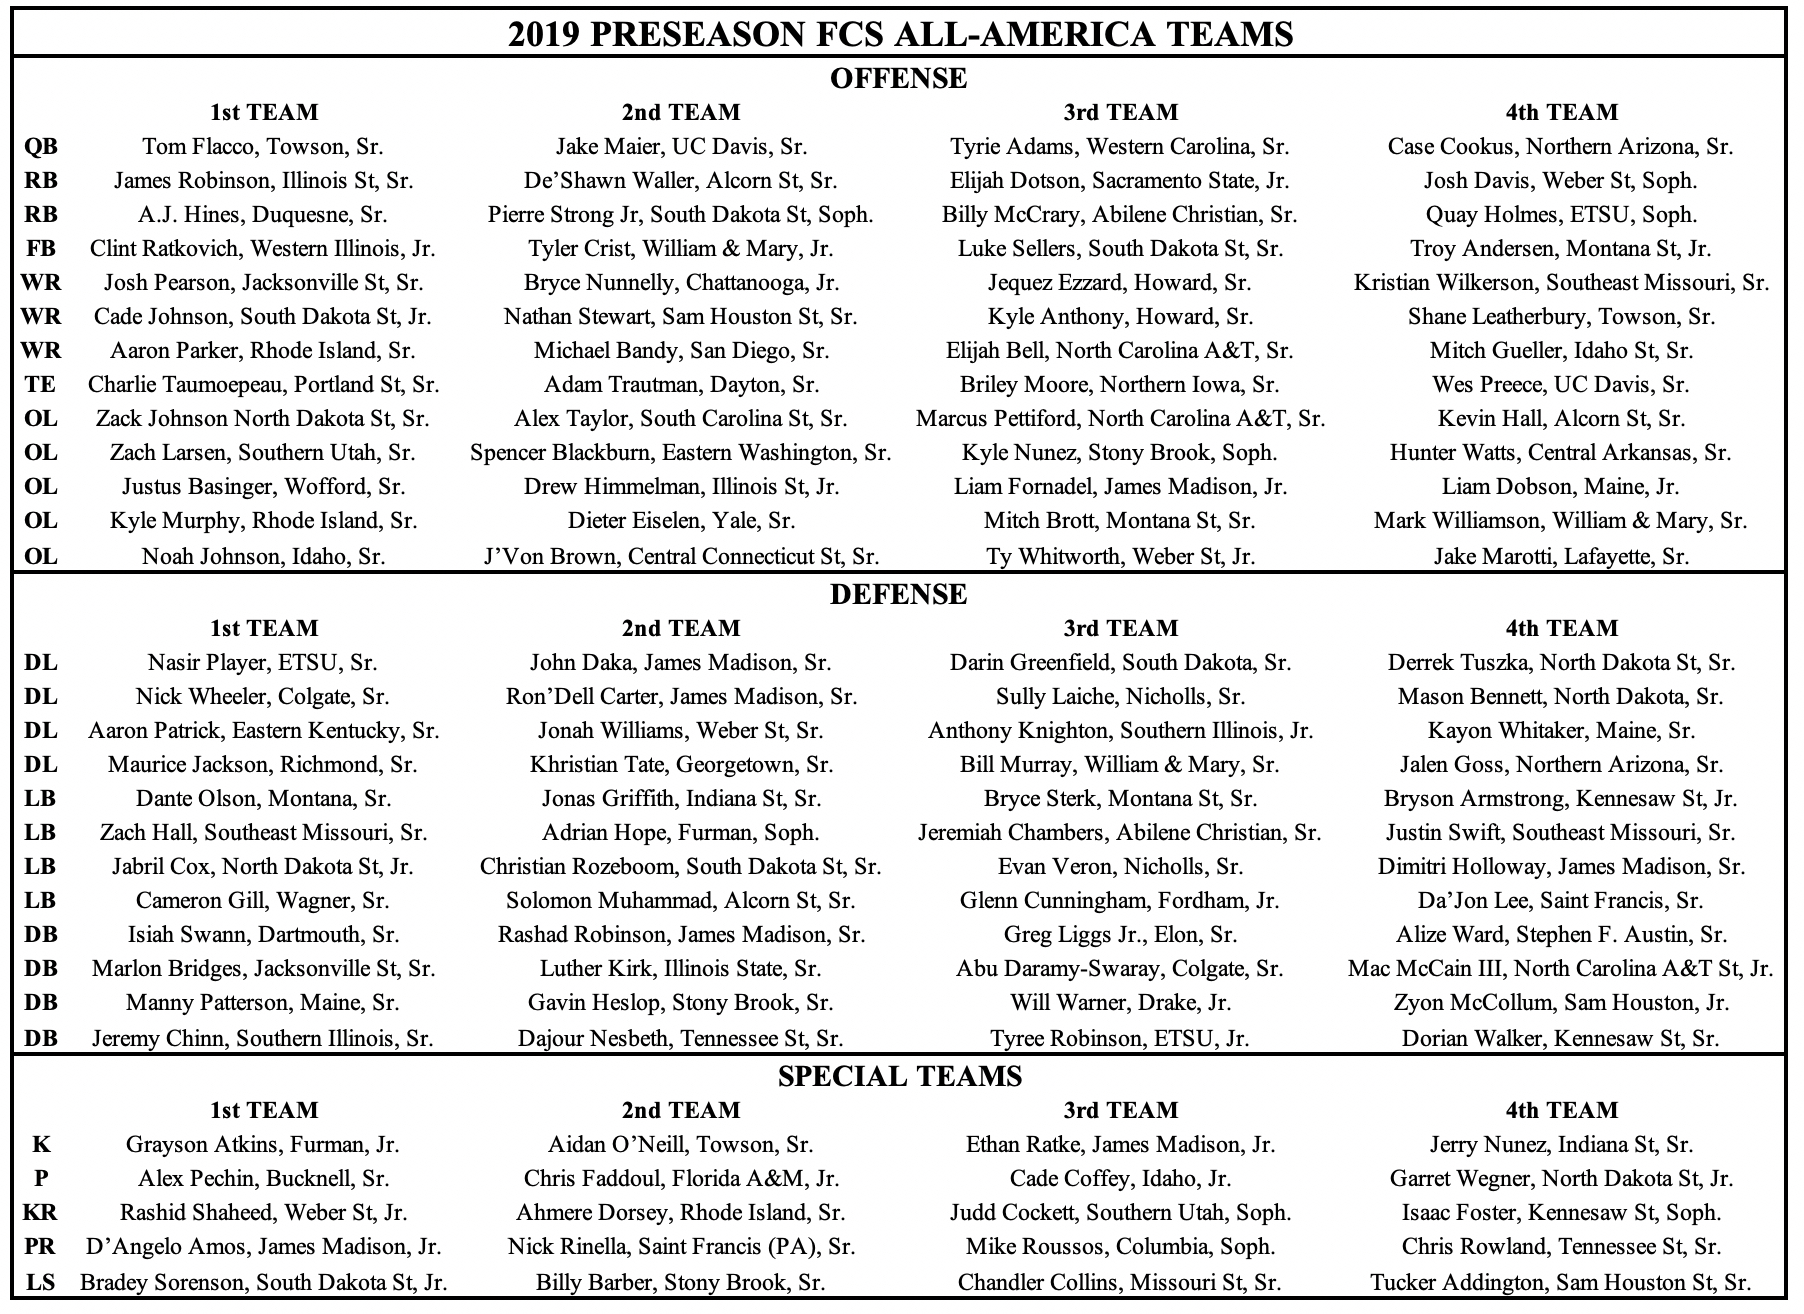 2019 Phil Steele's FCS Preseason All American and All Conf Teams.